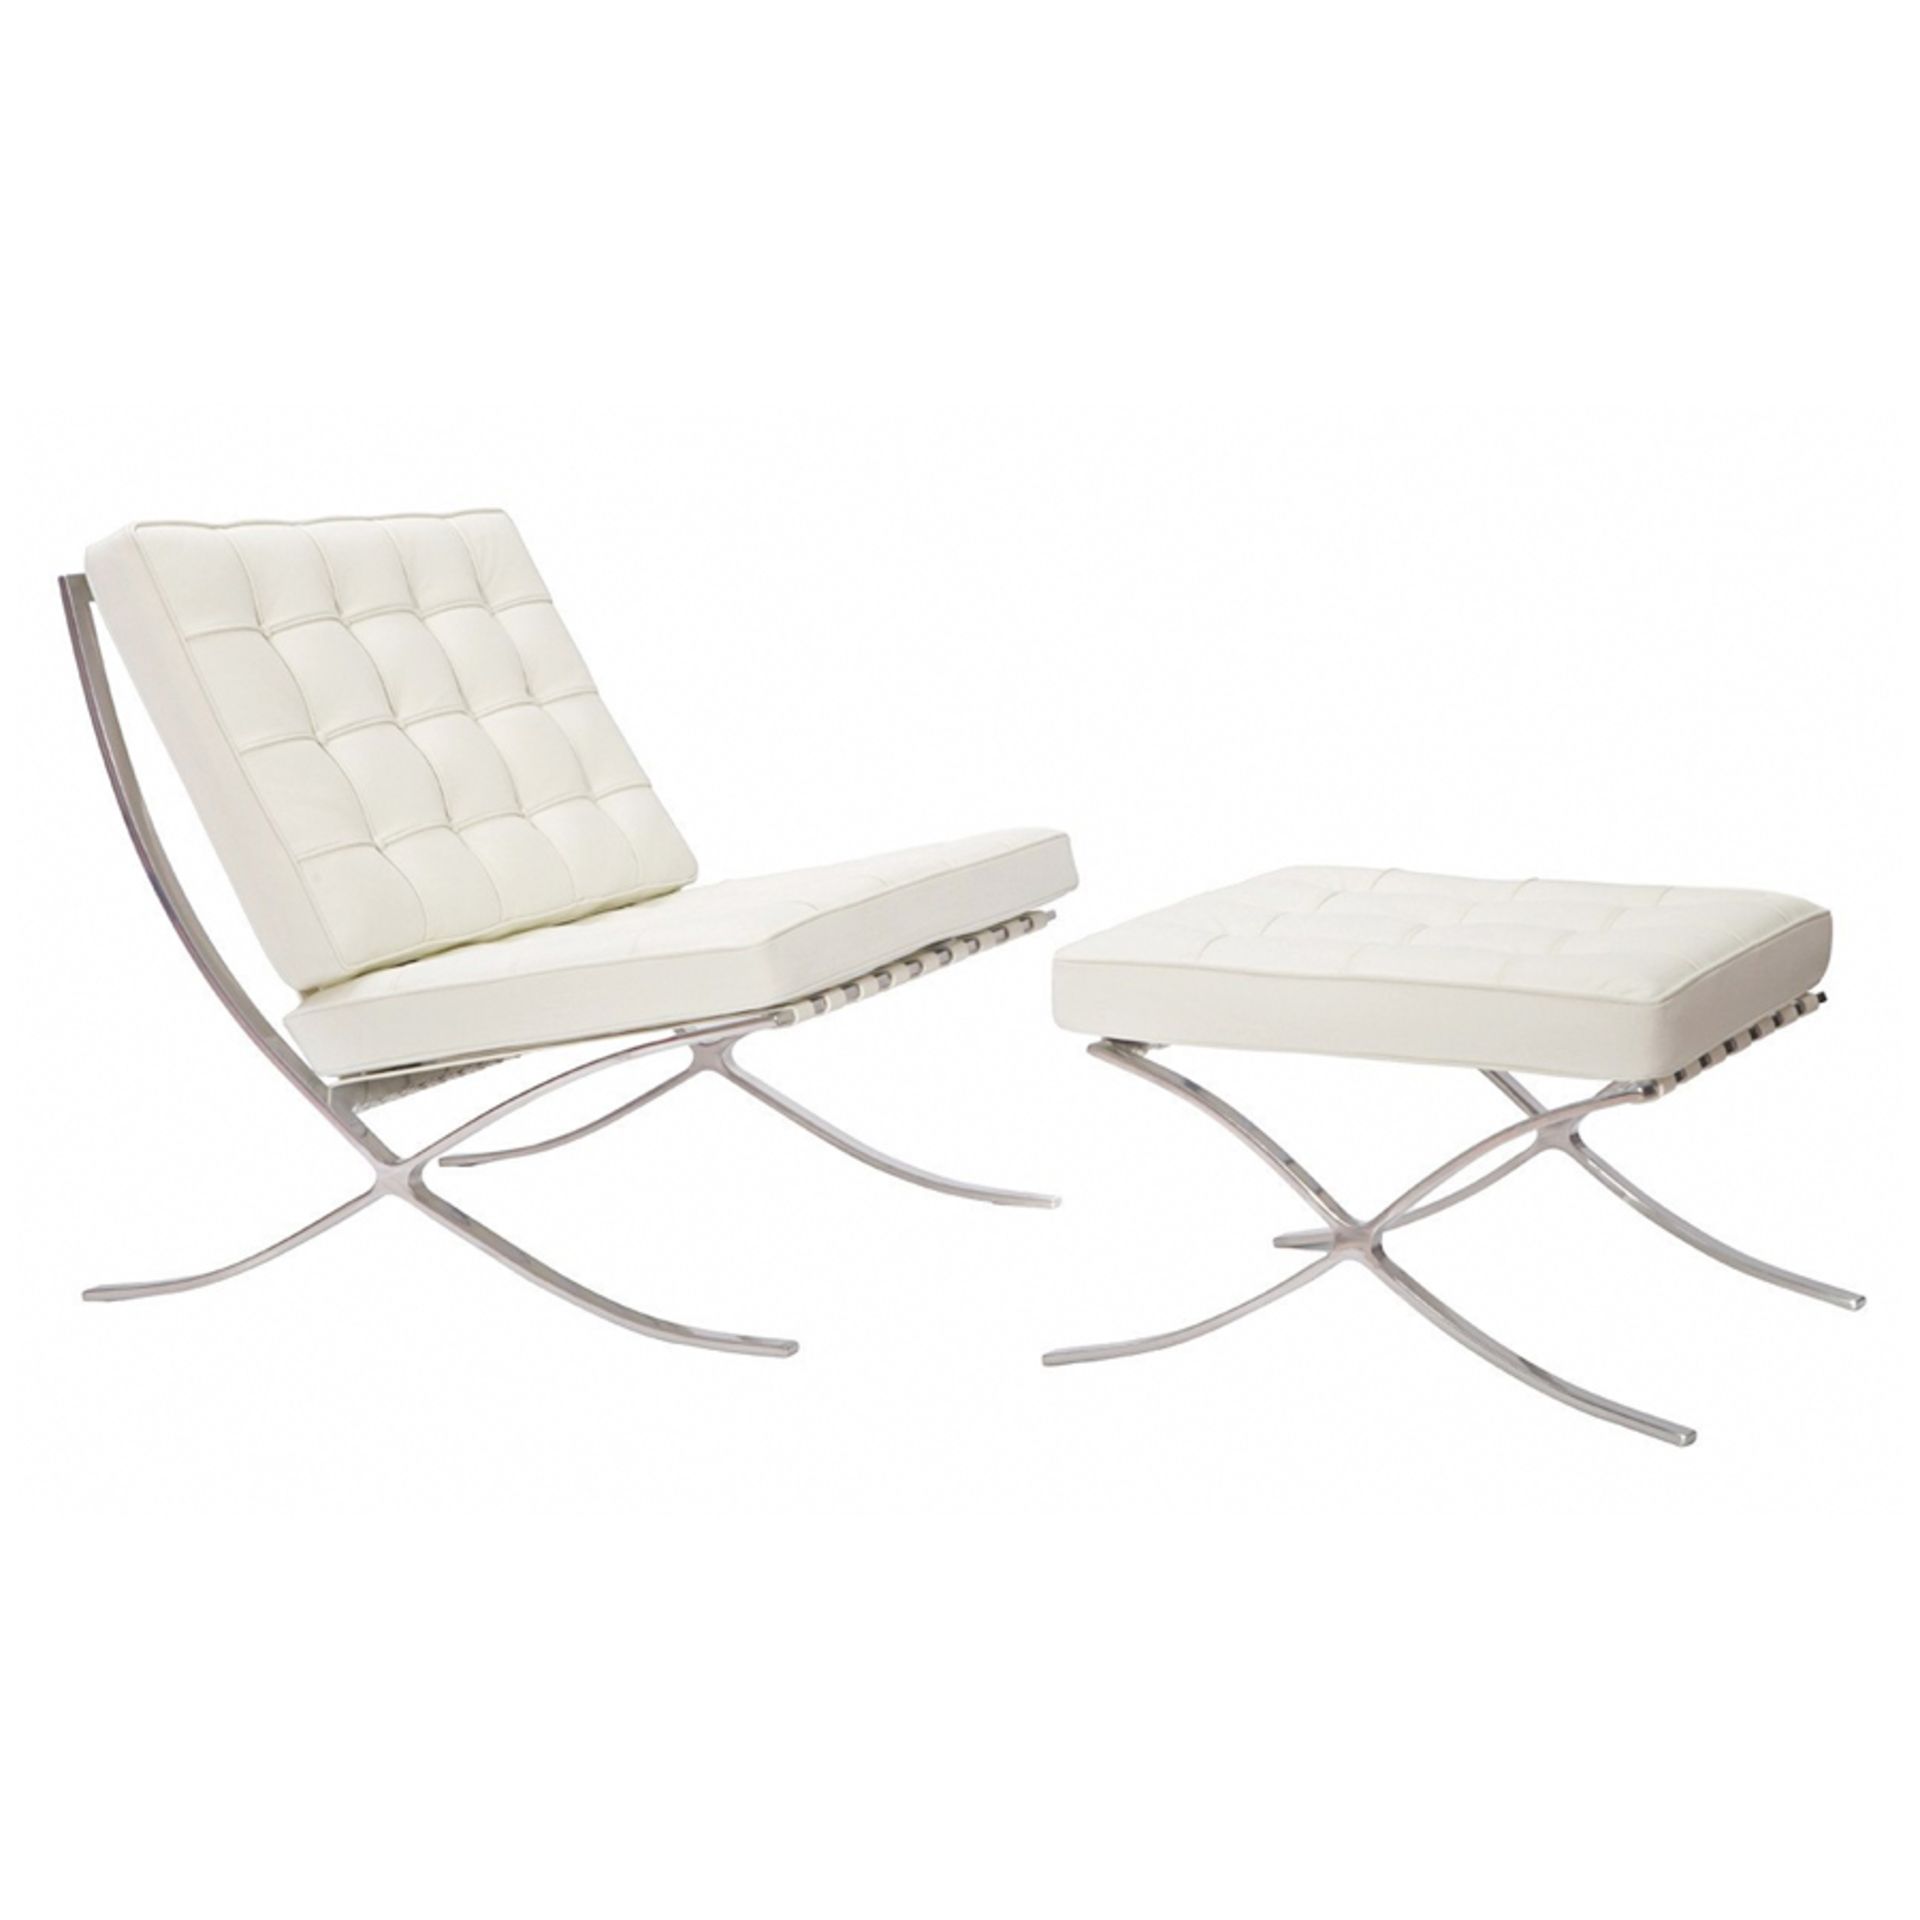 BRAND NEW BOXED WHITE LEATHER BARCELONA CHAIR AND FOOTSTOOL